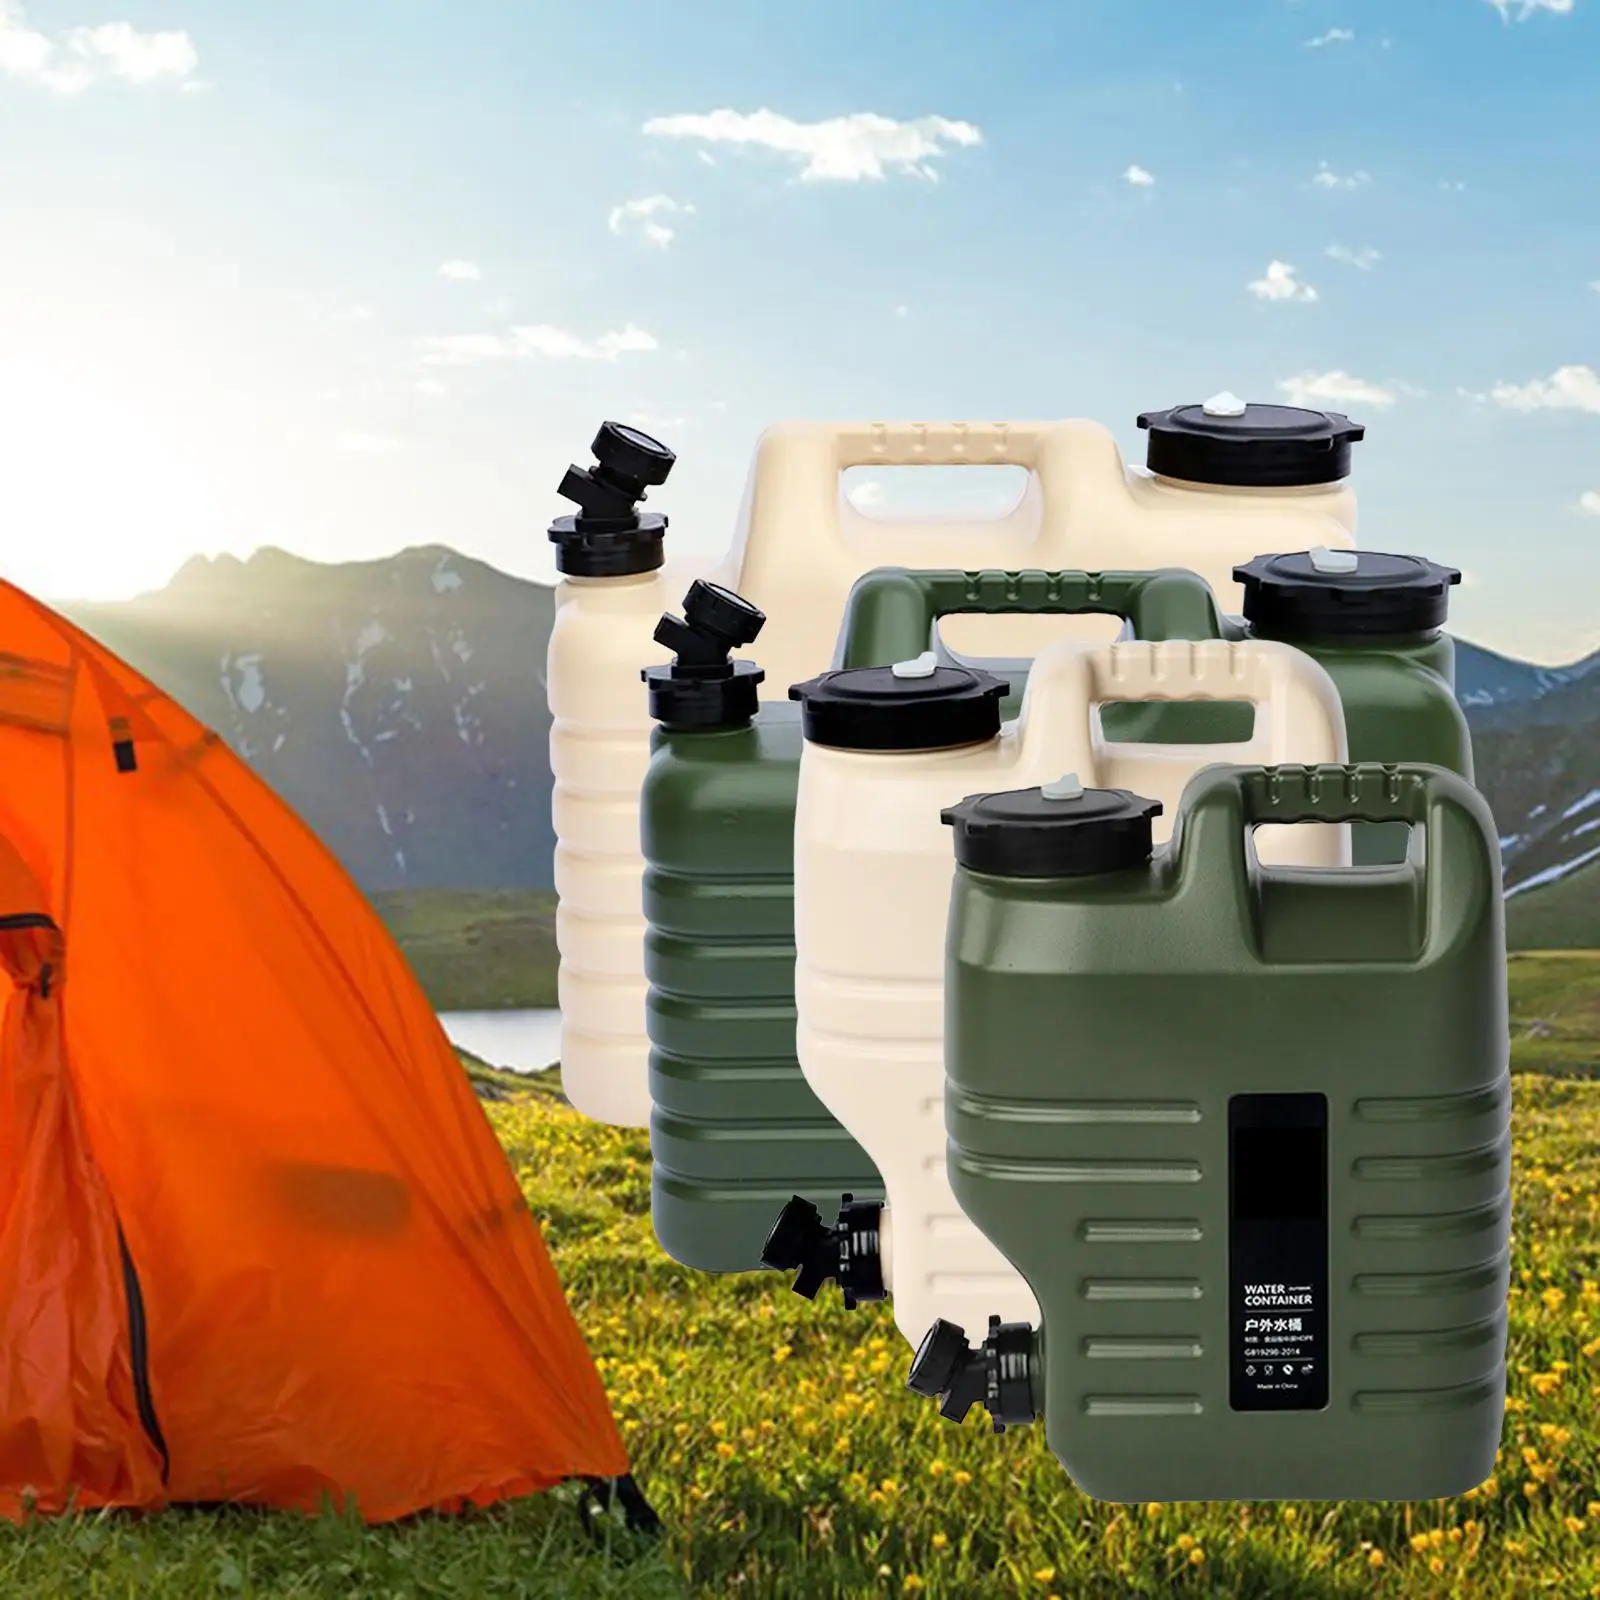 Portable Water Container with Spigot, Water Storage Water Jug for Camping Outdoor Hiking